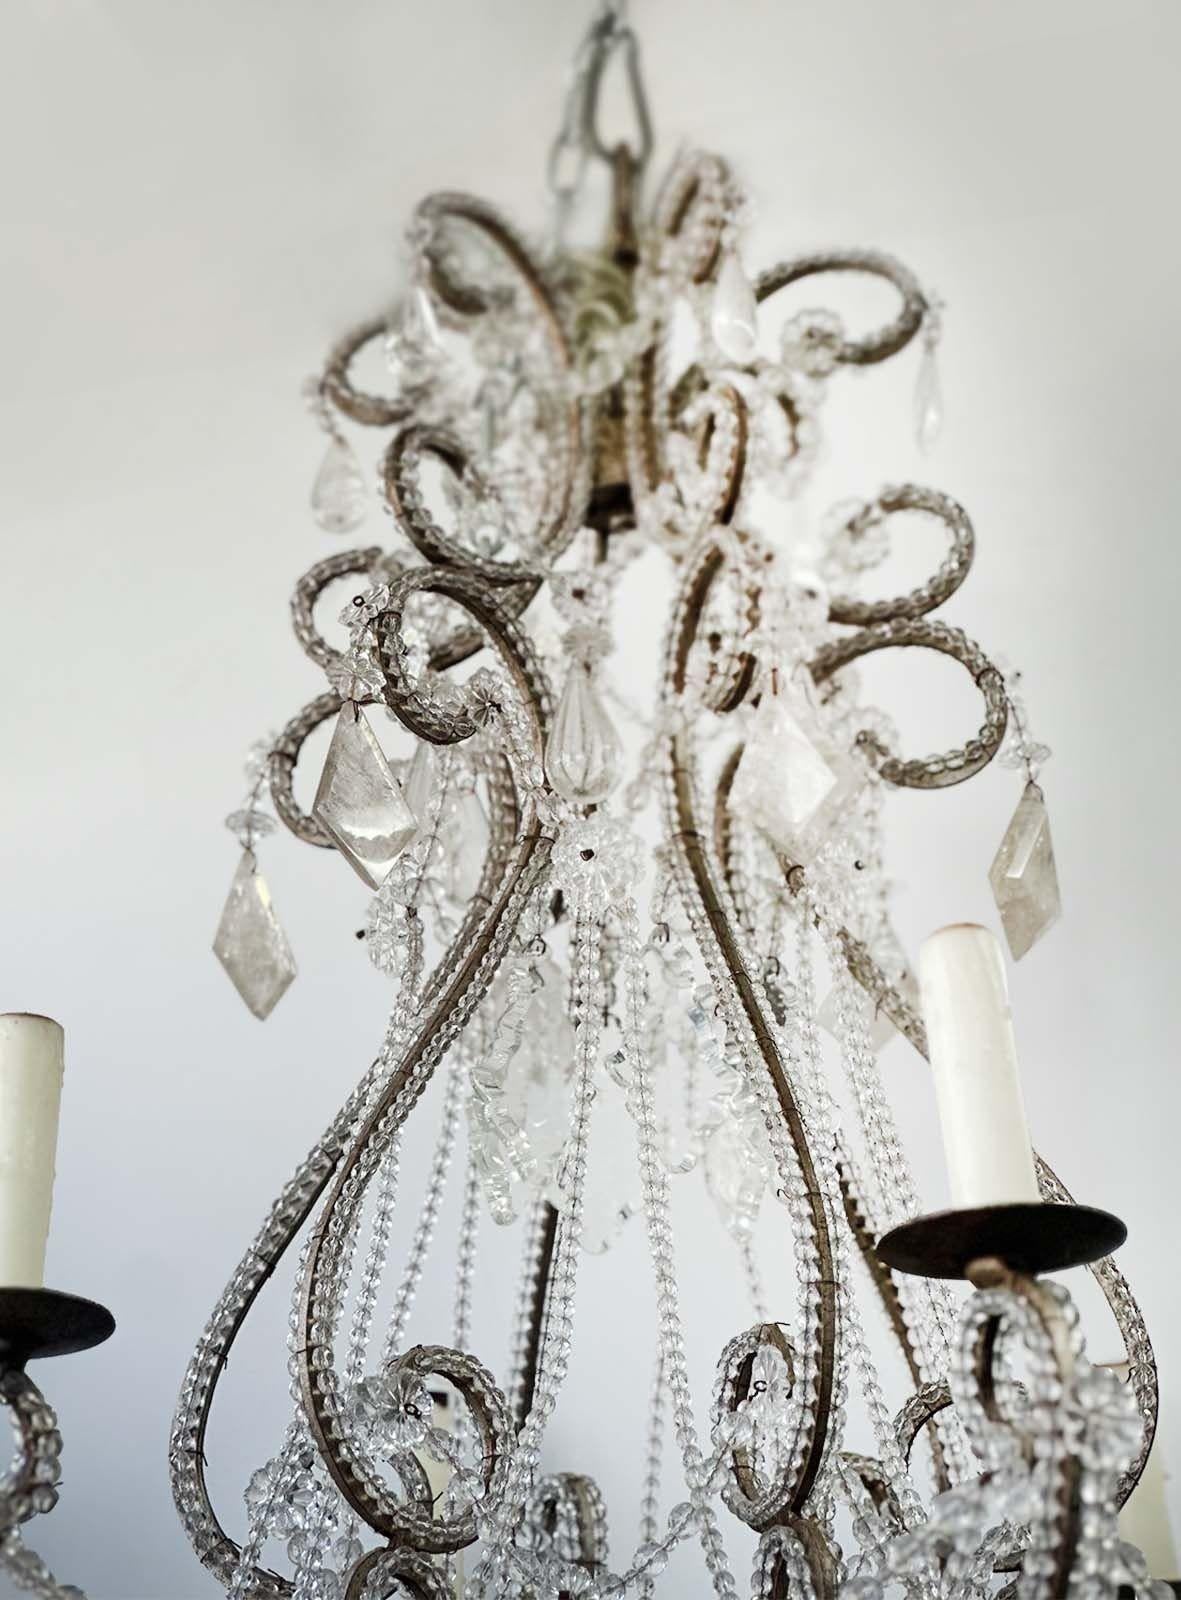 Suspended from an ornate metal frame, the chandelier emanates a timeless elegance that captures the essence of Venetian opulence. Adorned with handcrafted crystal beading, the chandelier exudes a luxurious charm. Each bead is carefully shaped and